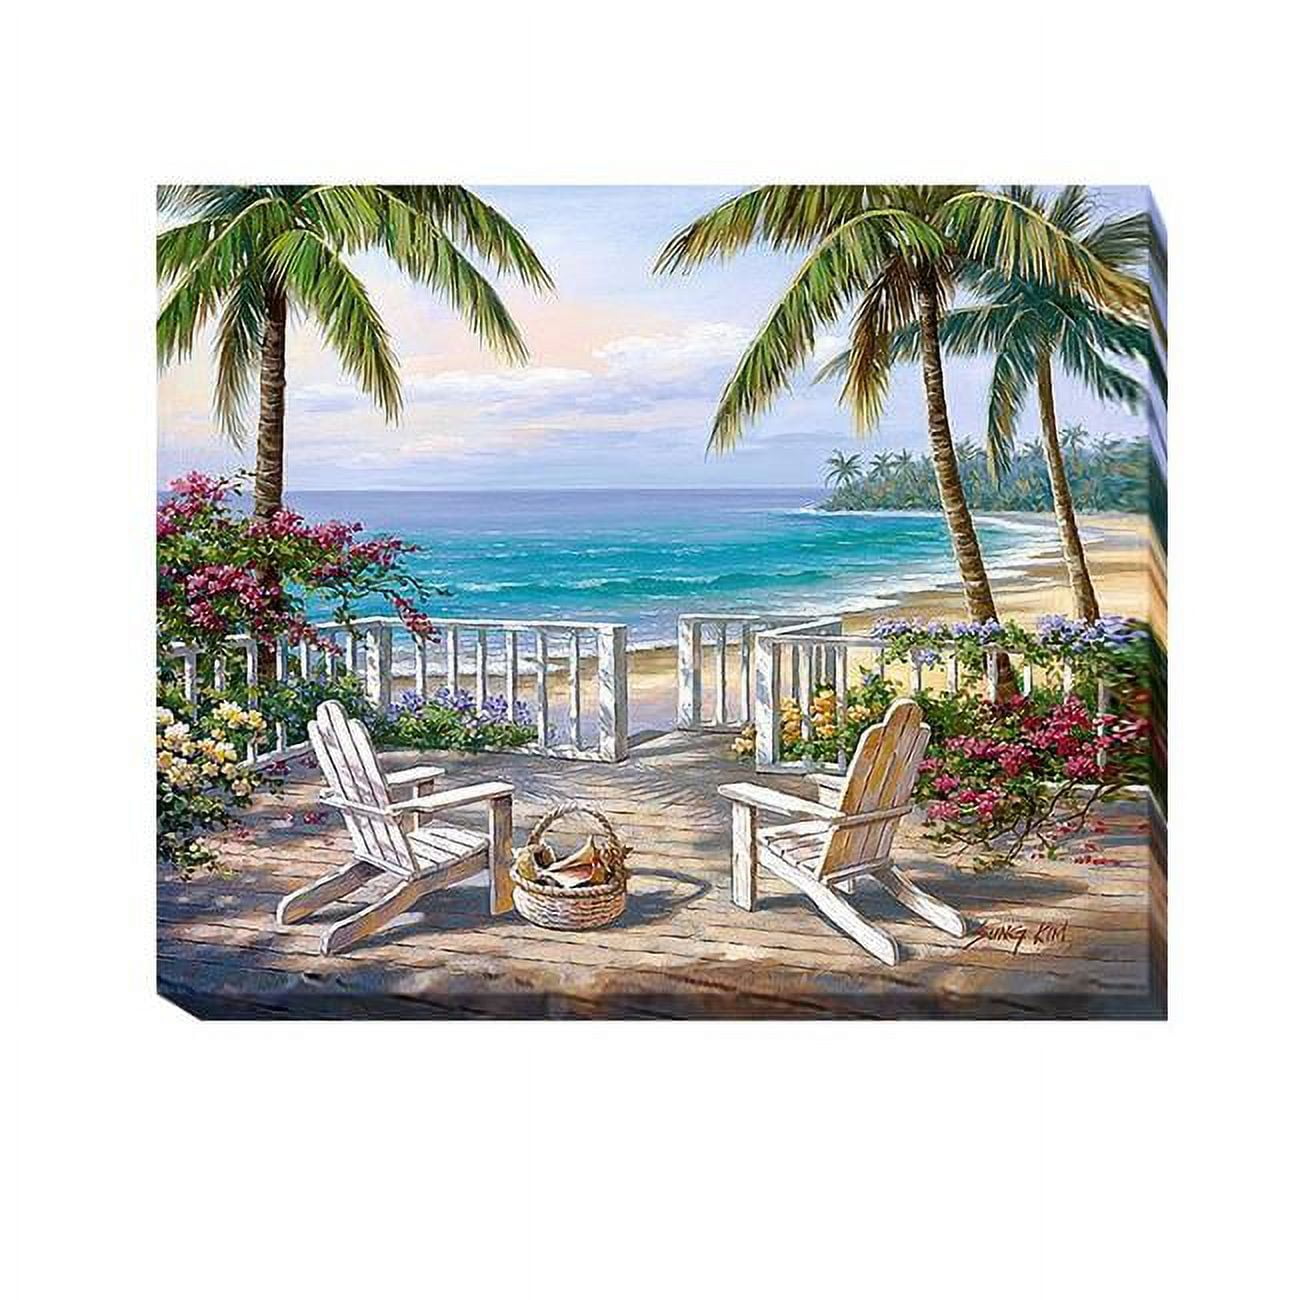 35425748ig Coastal View By Sung Kim Premium Oversize Gallery-wrapped Canvas Giclee Art - 35 X 42 In.